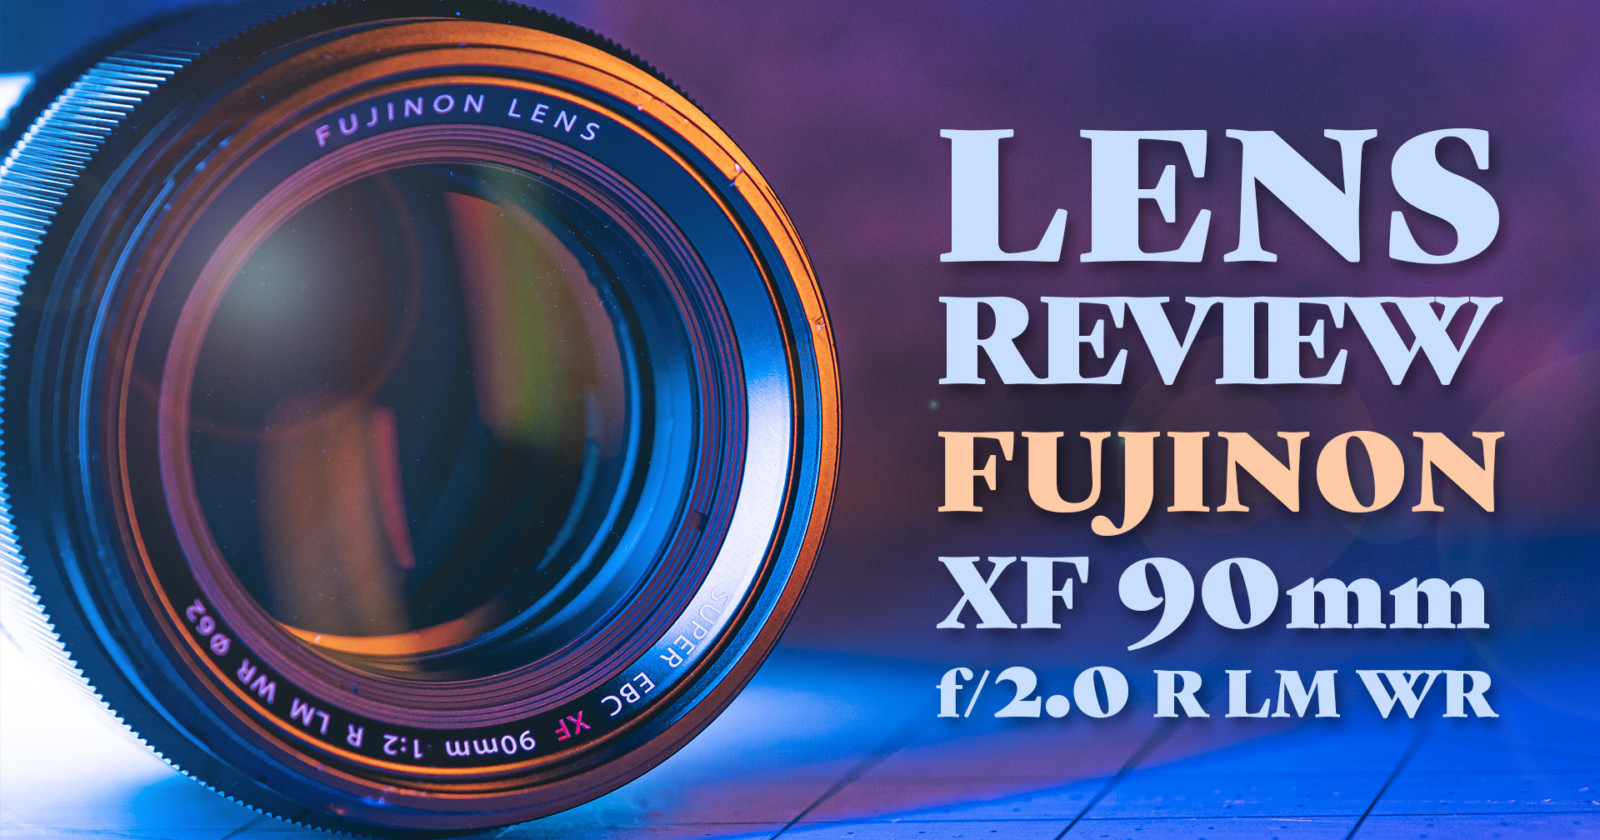 A Review of the Fujifilm XF 90mm f/2.0 R LM WR Lens